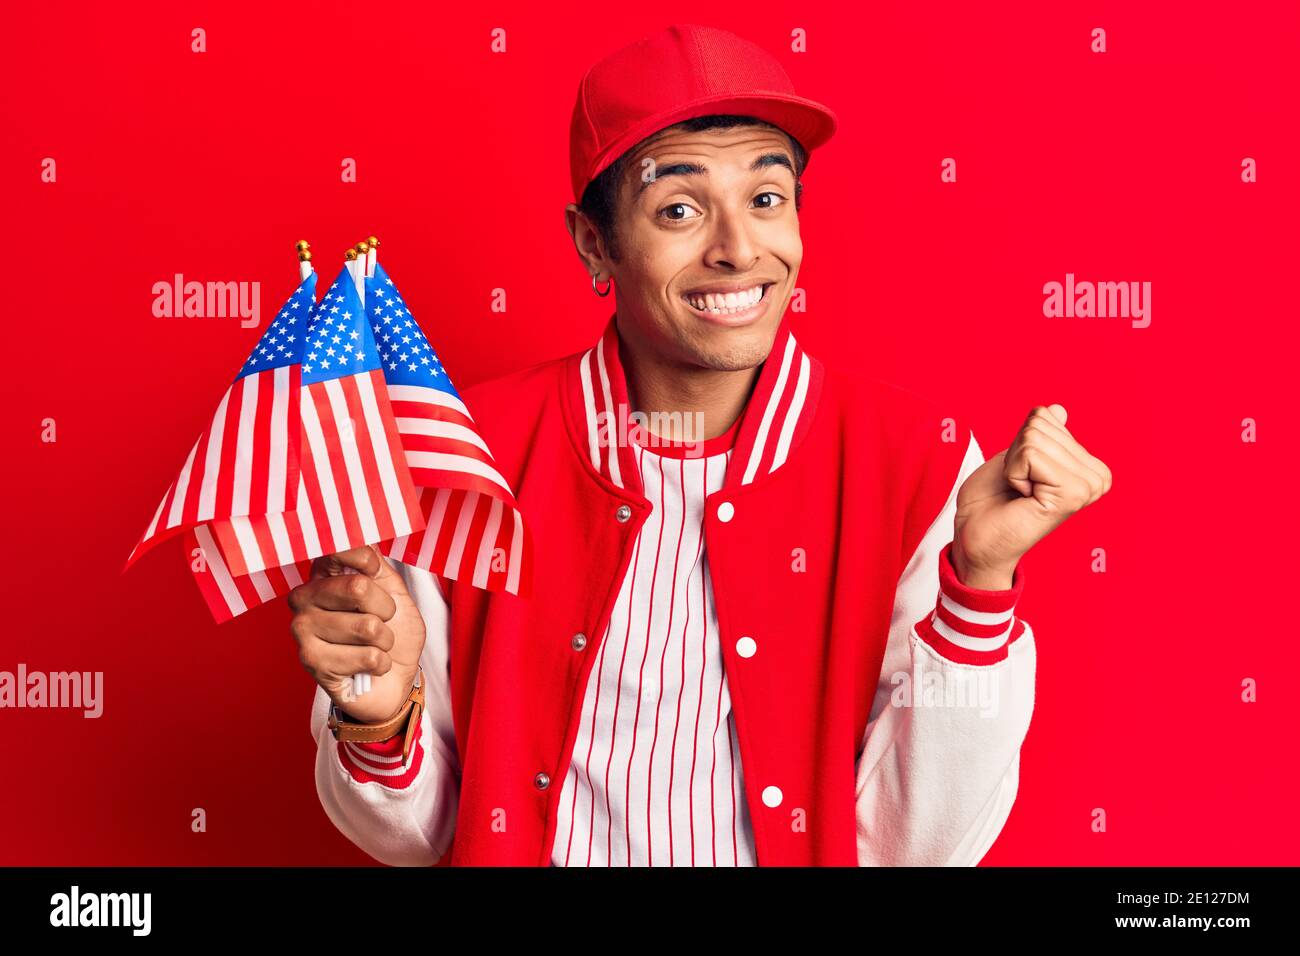 Young african amercian man wearing baseball uniform holding america flags screaming proud, celebrating victory and success very excited with raised ar Stock Photo